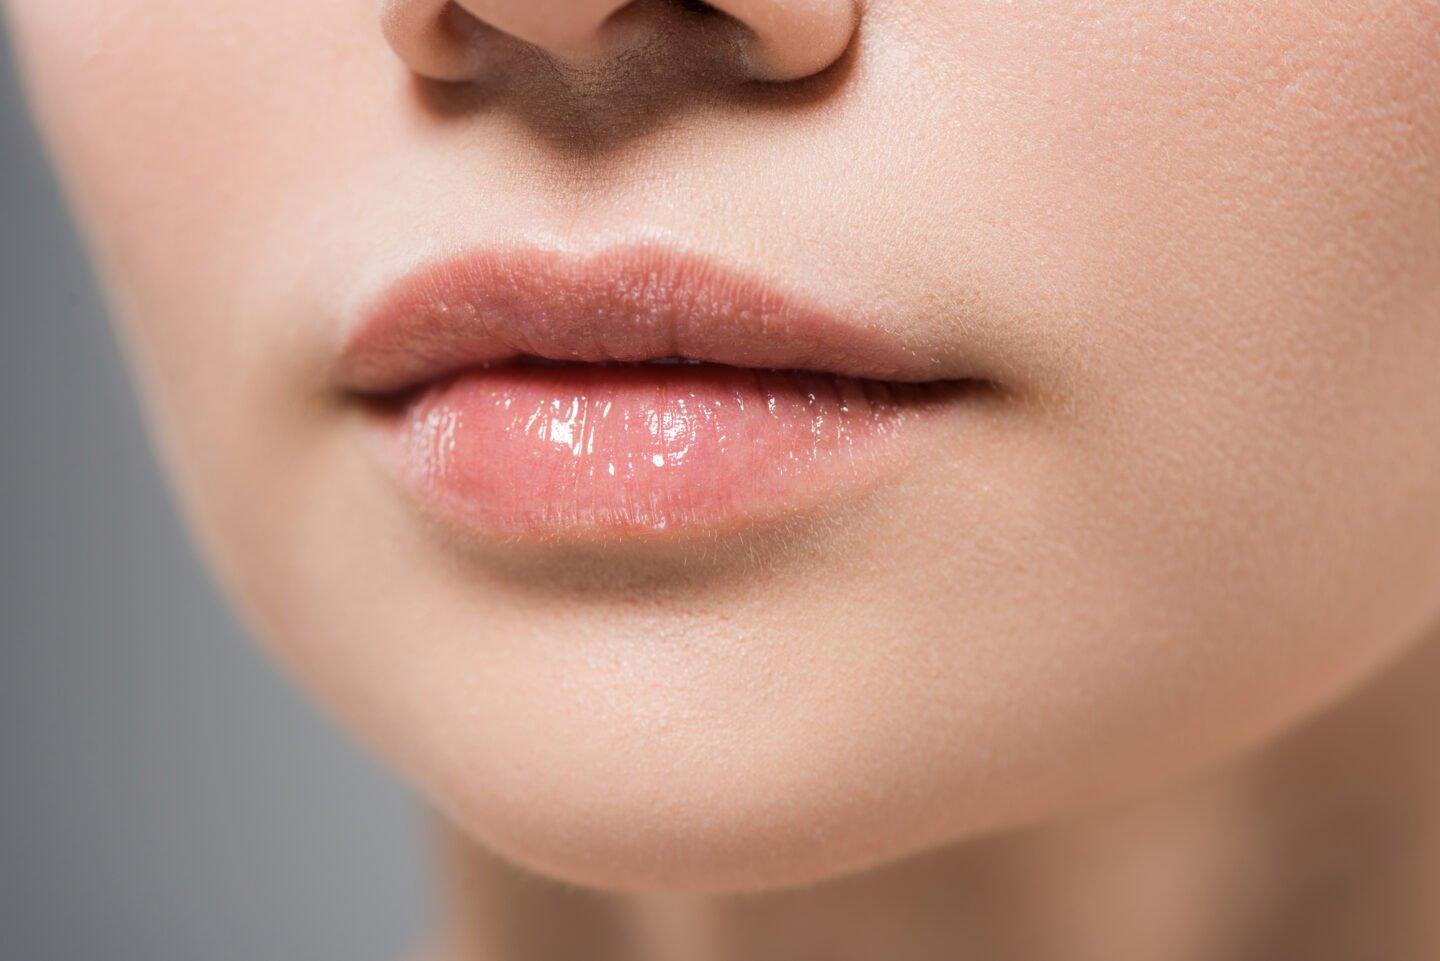 Does The Size Of Our Lips Change During The Day?